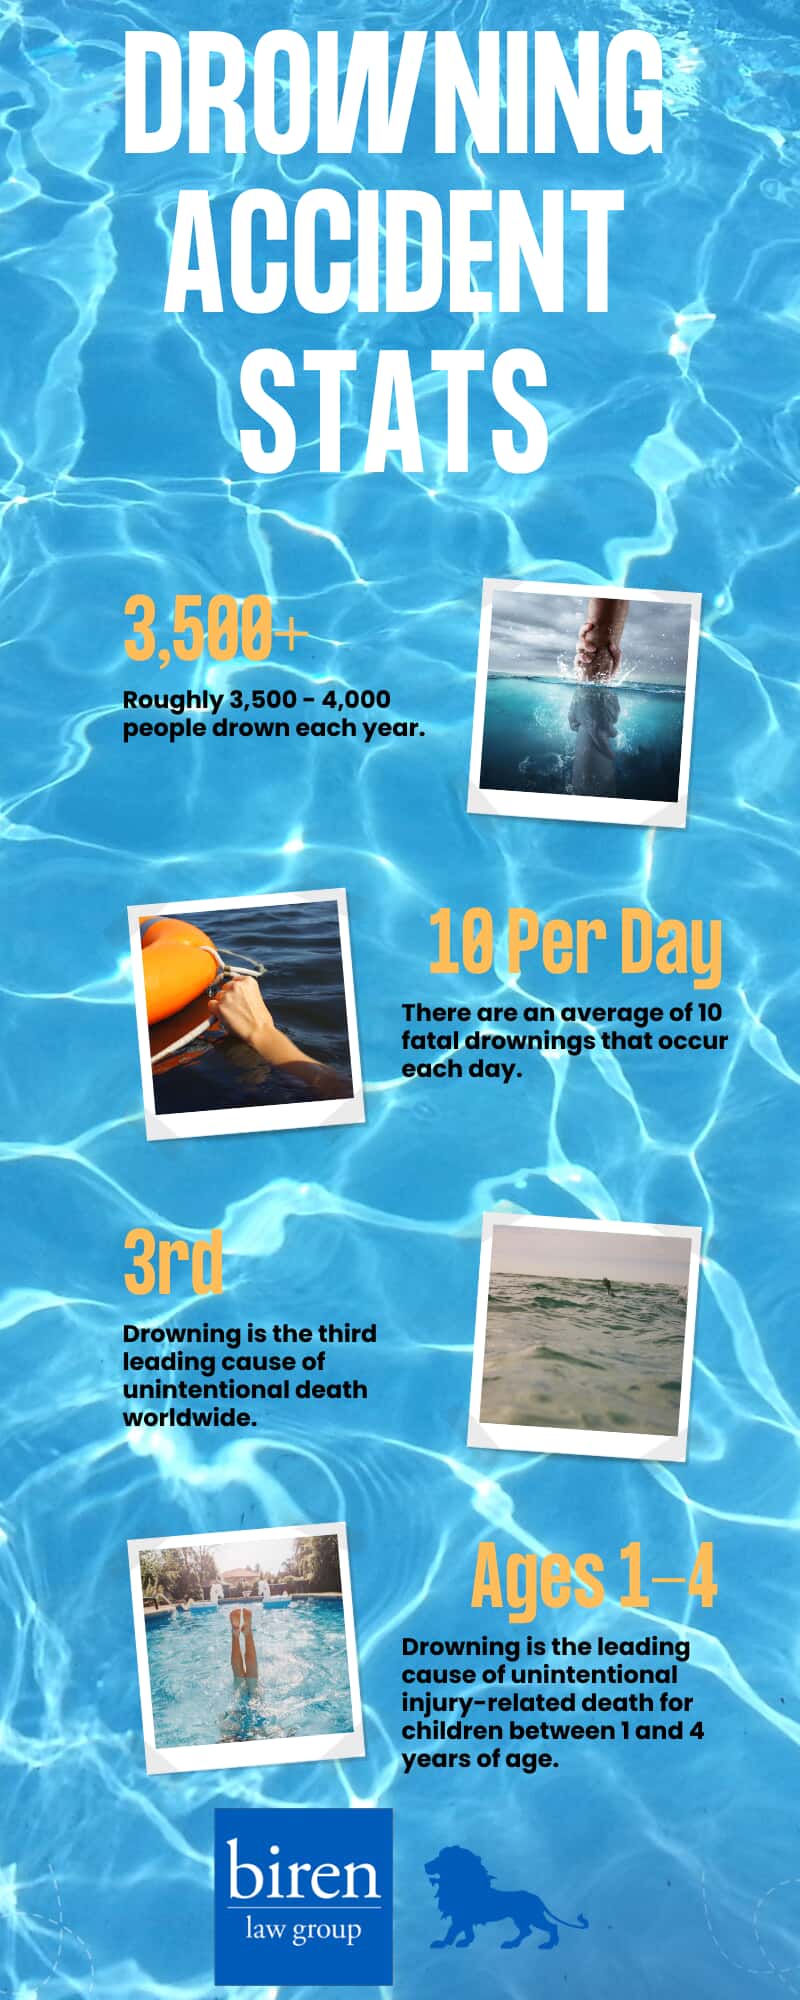 a few drowning accident stats including total number of deaths each year, deaths per day, and more